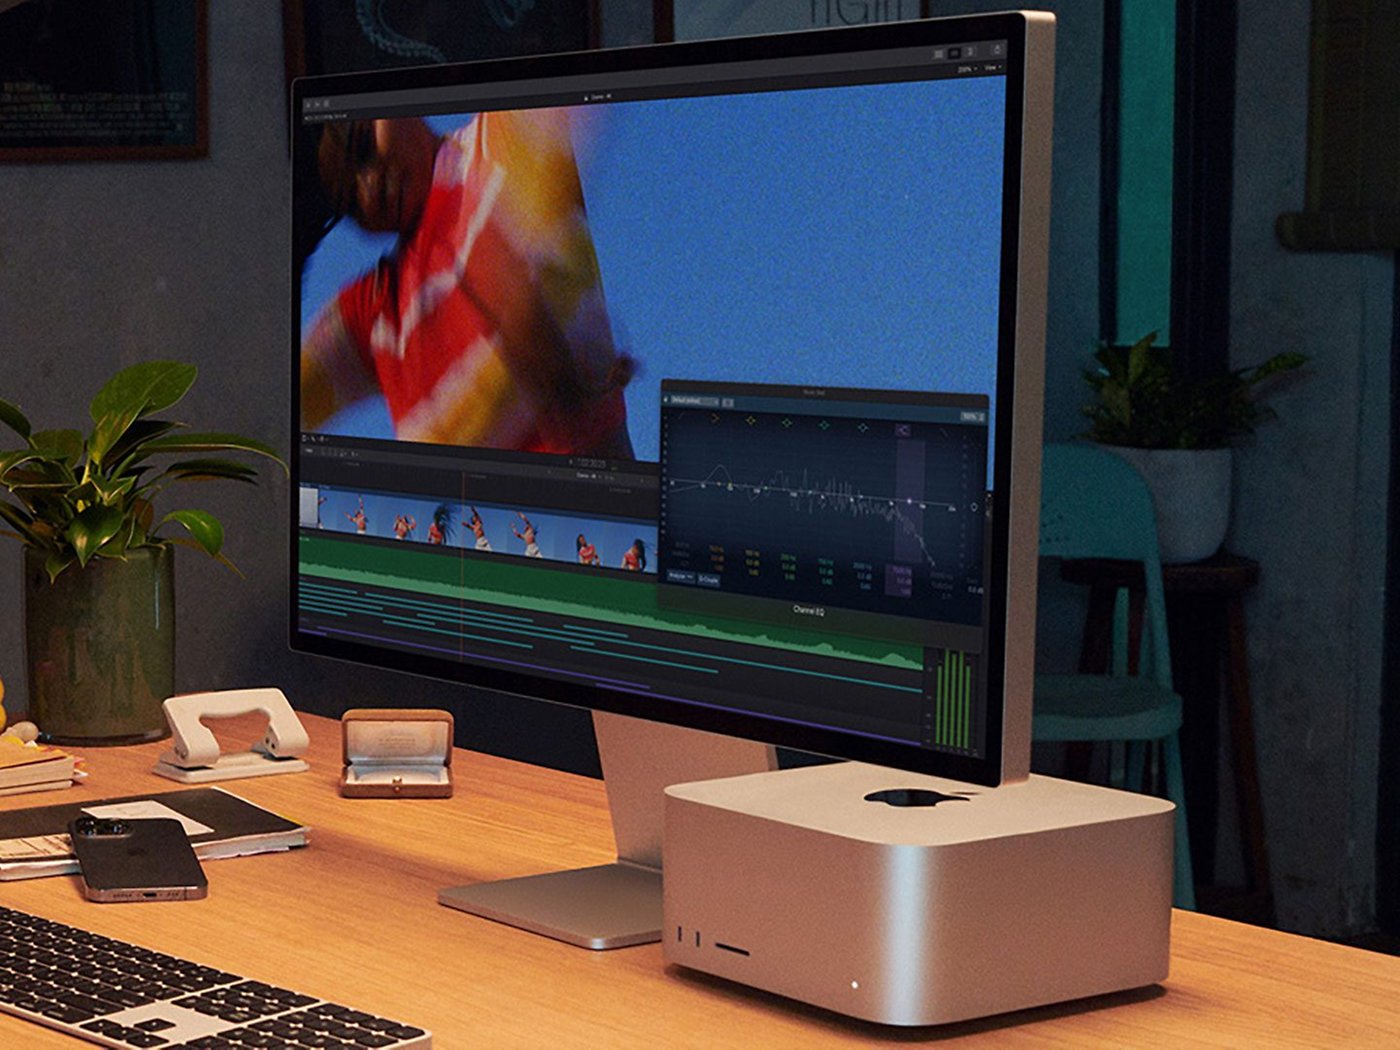 Mac Studio unveiled: The Most Powerful Apple PC Ever | nextpit